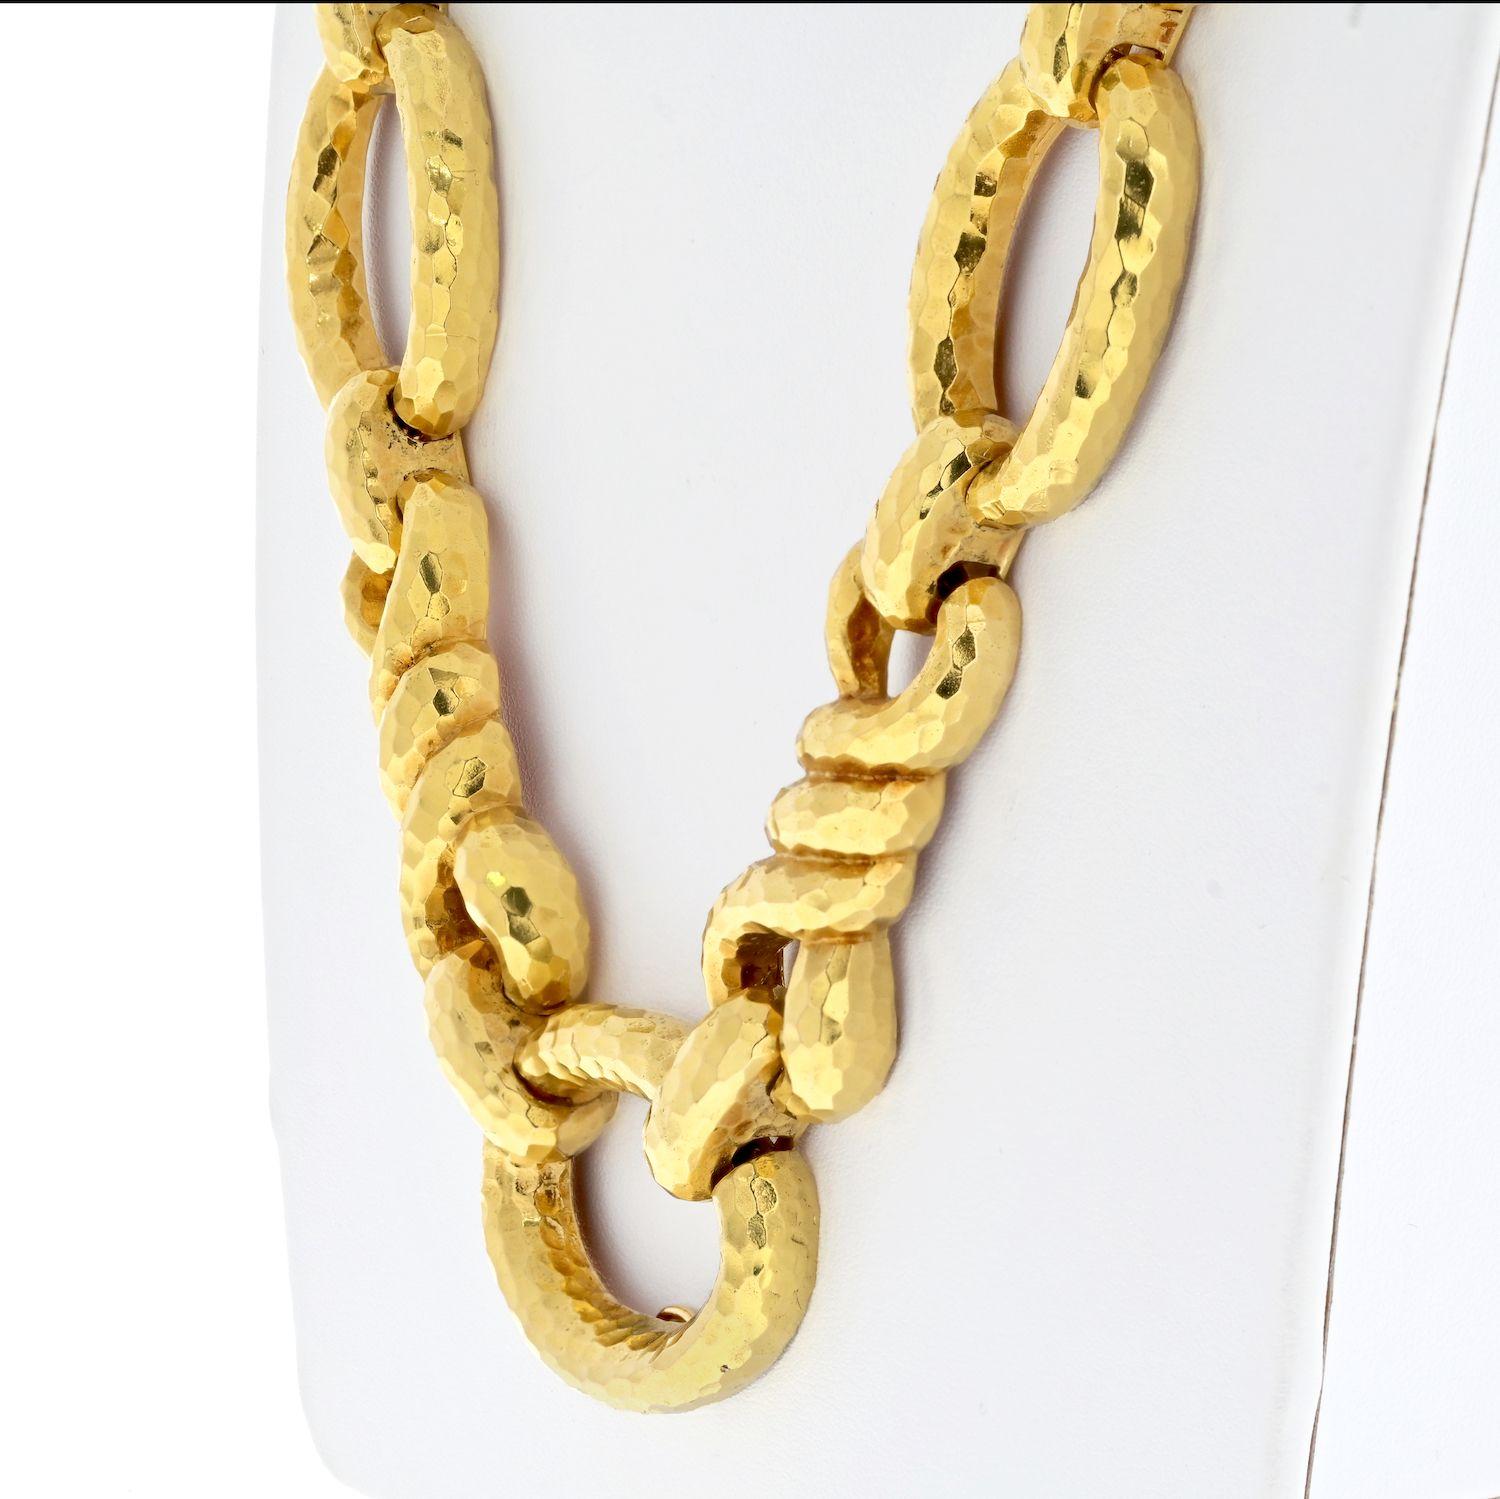 Introducing a remarkable piece of jewelry from the esteemed designer David Webb, the 18k Yellow Gold Link Chain Necklace. This necklace exudes a captivating blend of elegance and contemporary flair, making it a true statement piece. Crafted from